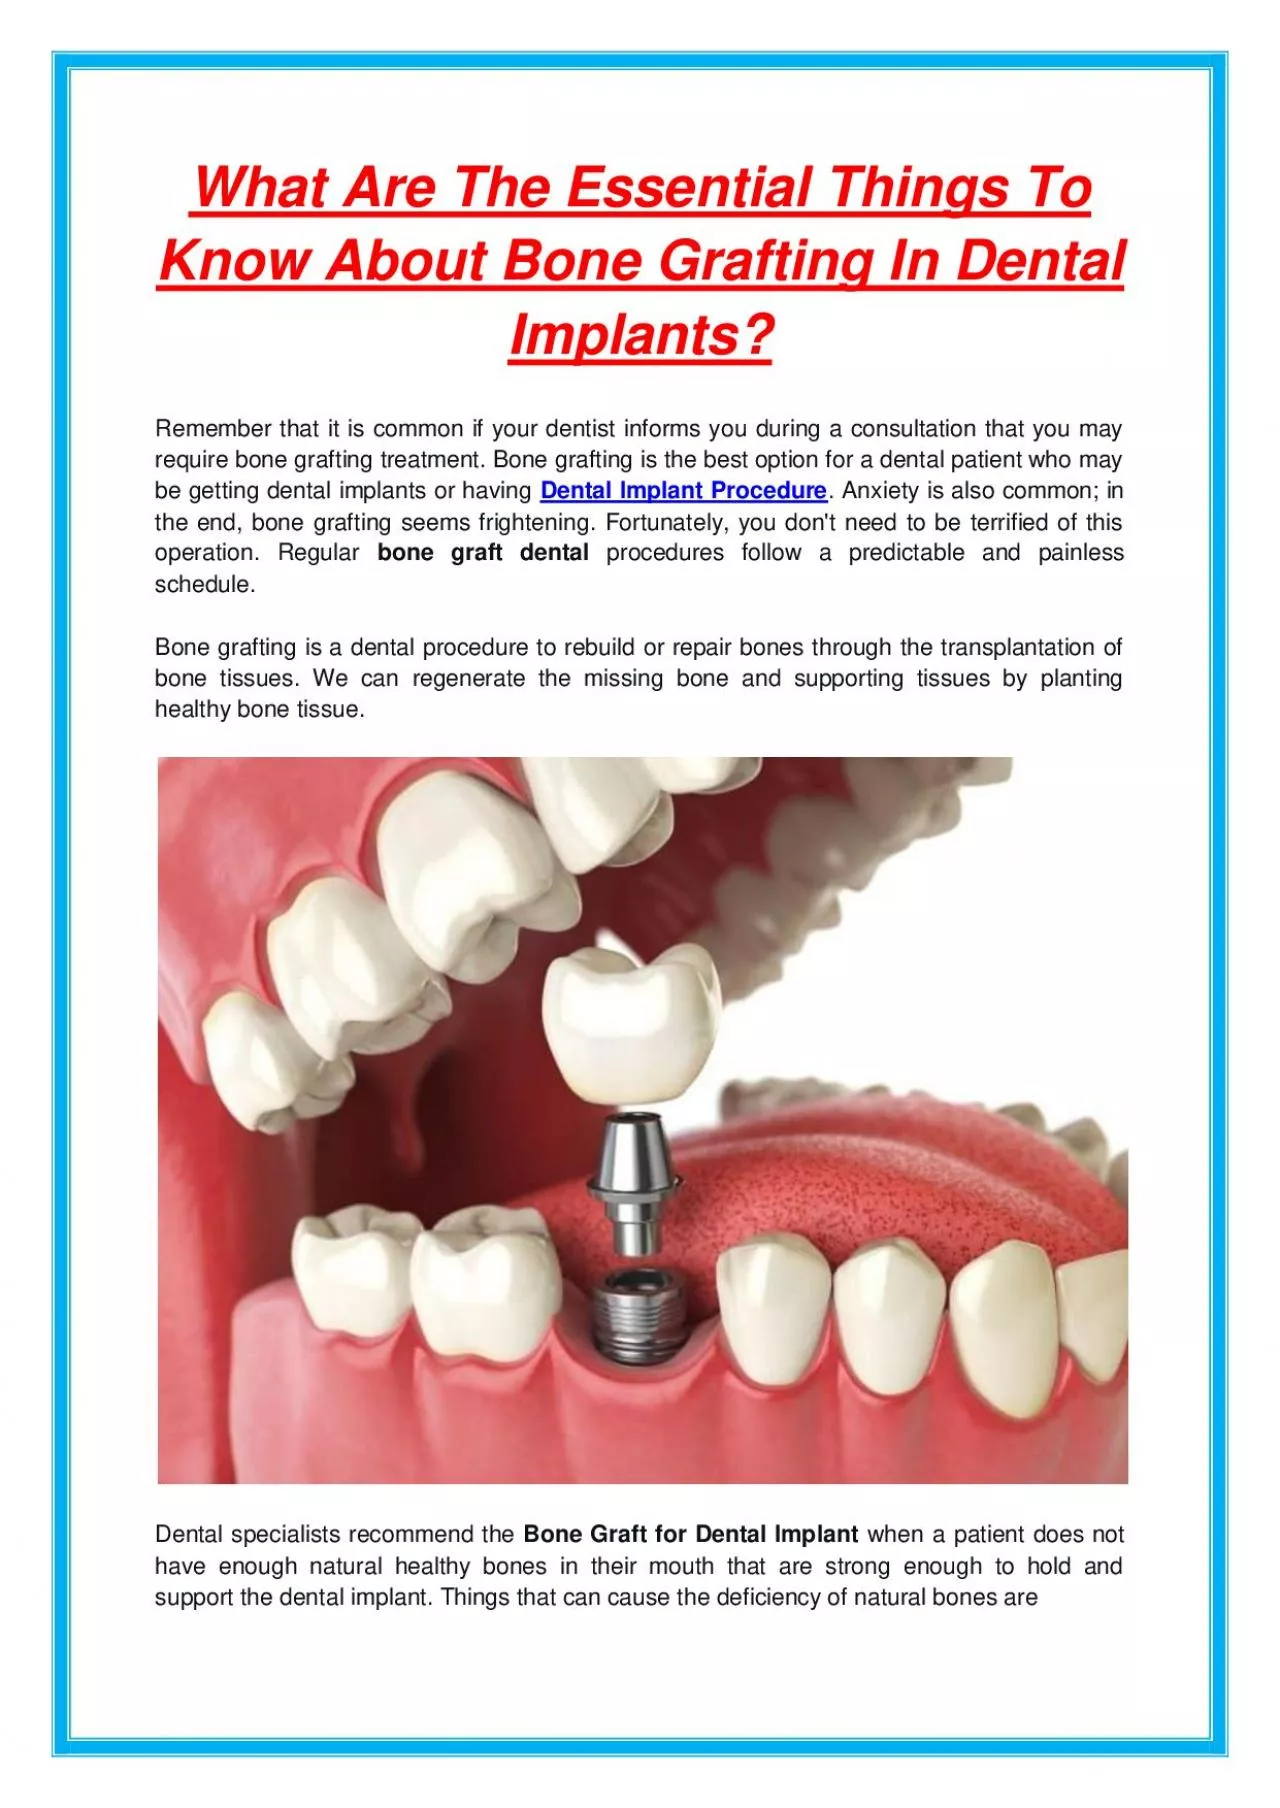 What Are The Essential Things To Know About Bone Grafting In Dental Implants?